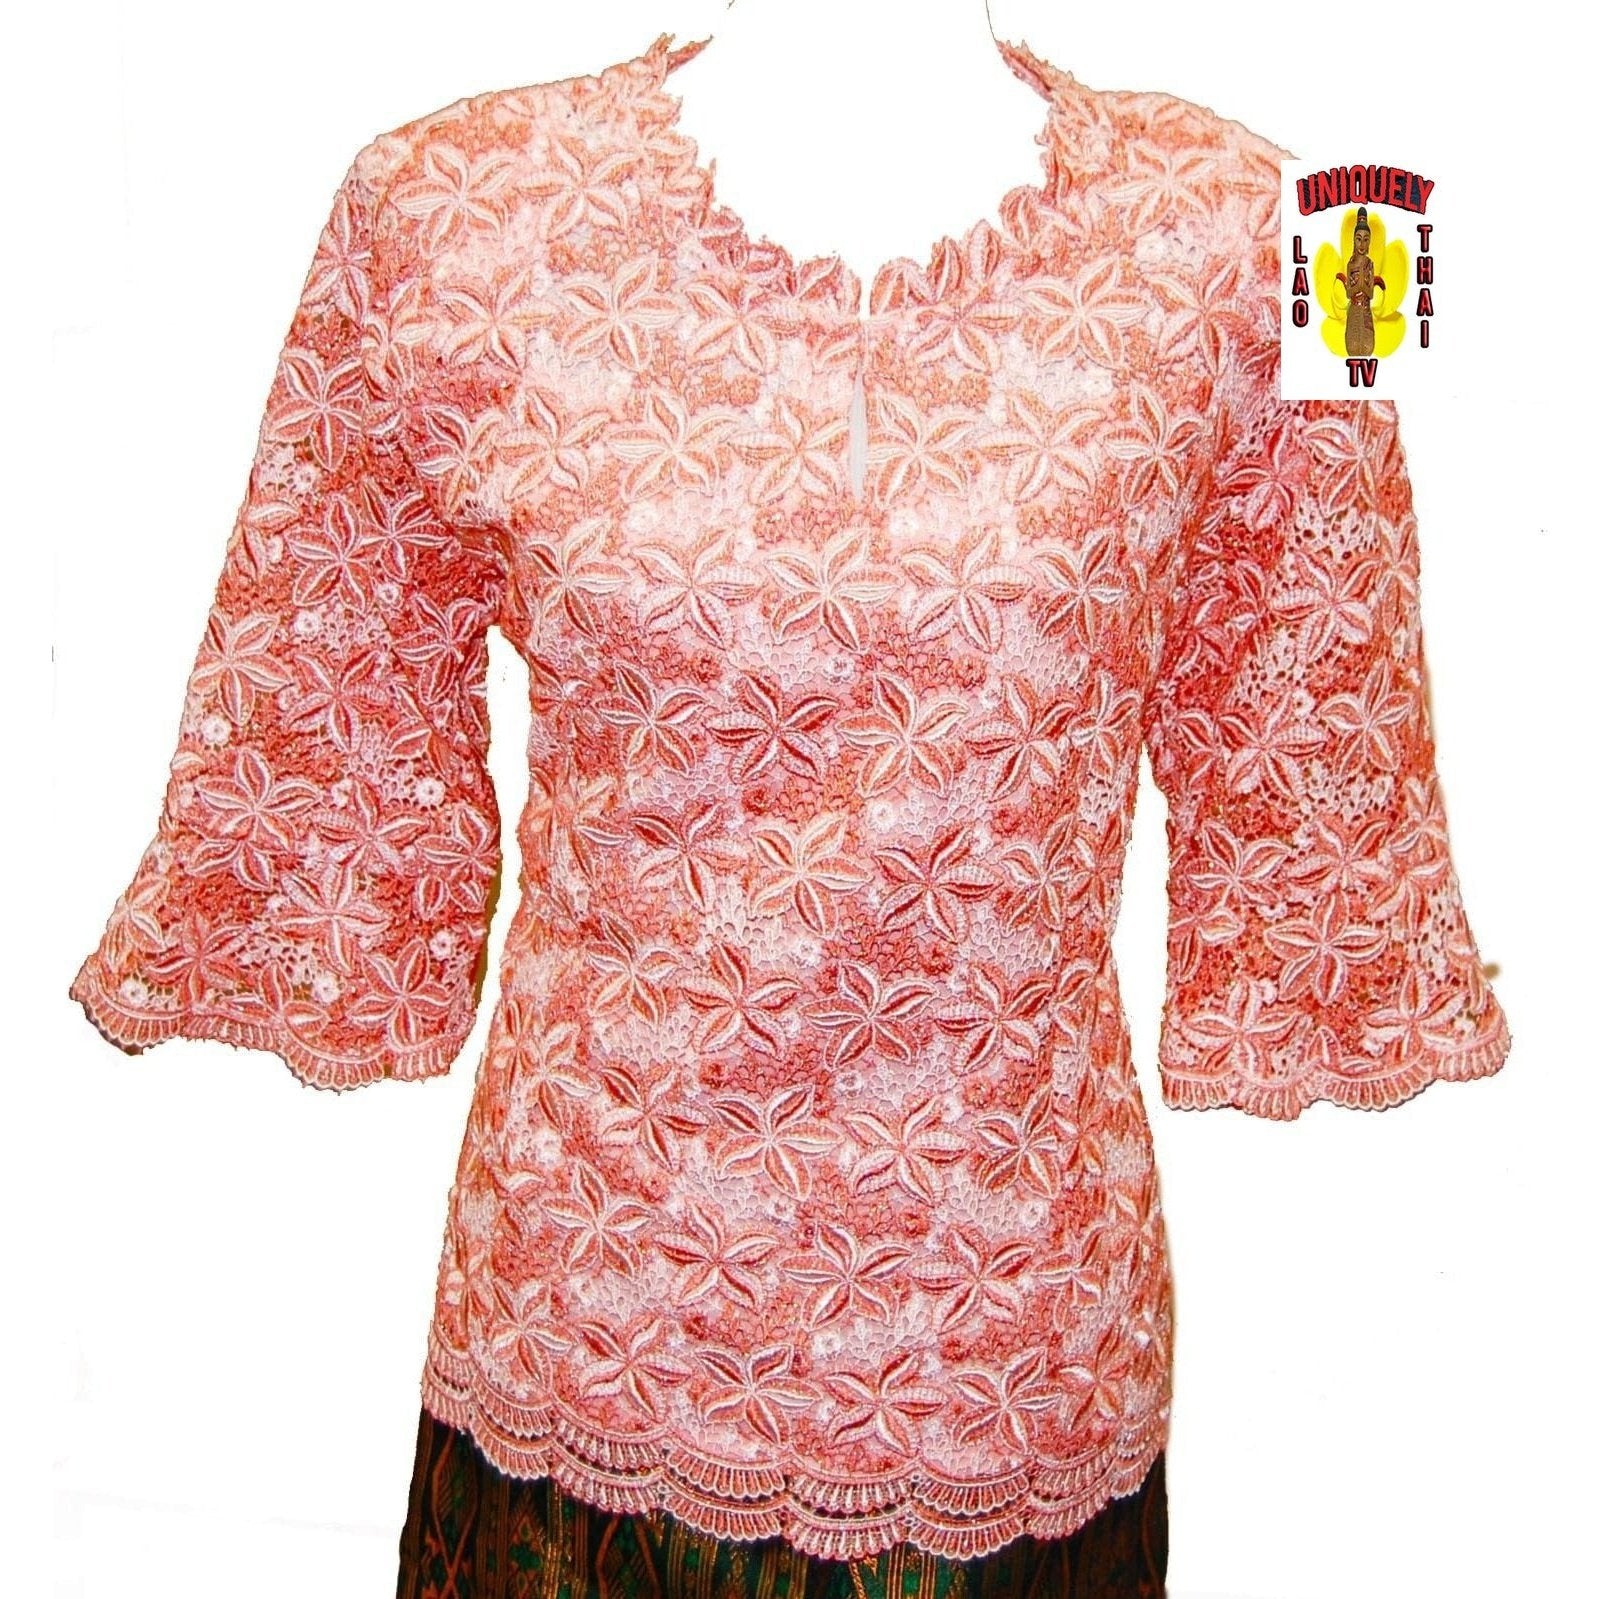 Traditional Thai Laos Lace Blouse Red & White